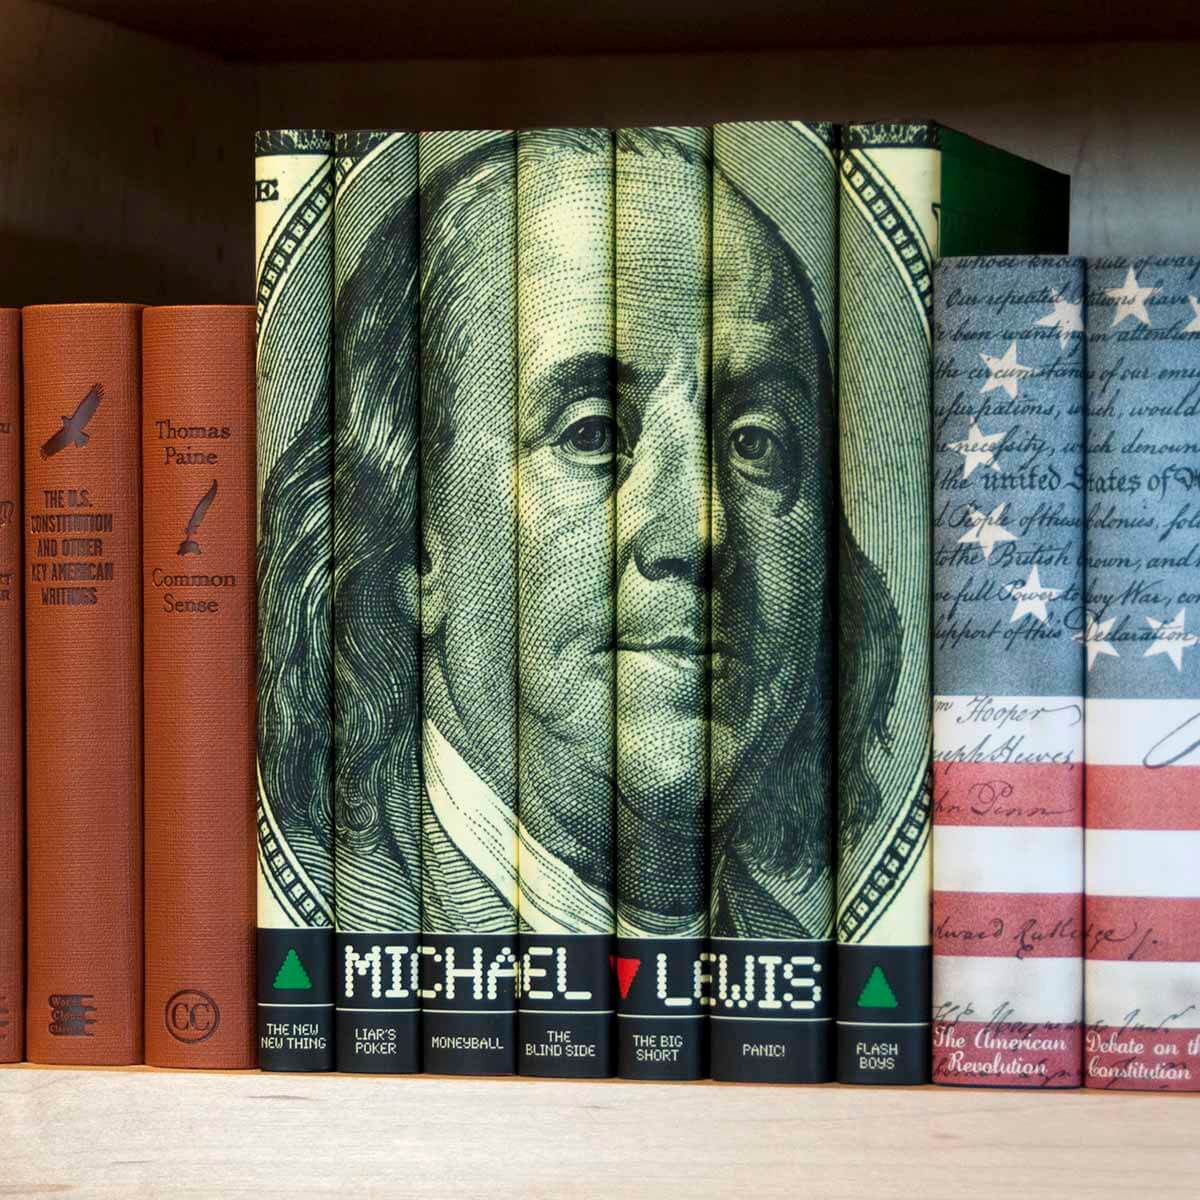 Michael Lewis' works are available here in a made-to-order (MTO) set of volumes published by W.W. Norton & Company and wrapped in custom-printed Juniper Books jackets that feature an illustration of the $100 bill, with the book titles and Lewis’s name cleverly disguised as stock ticker-tape.